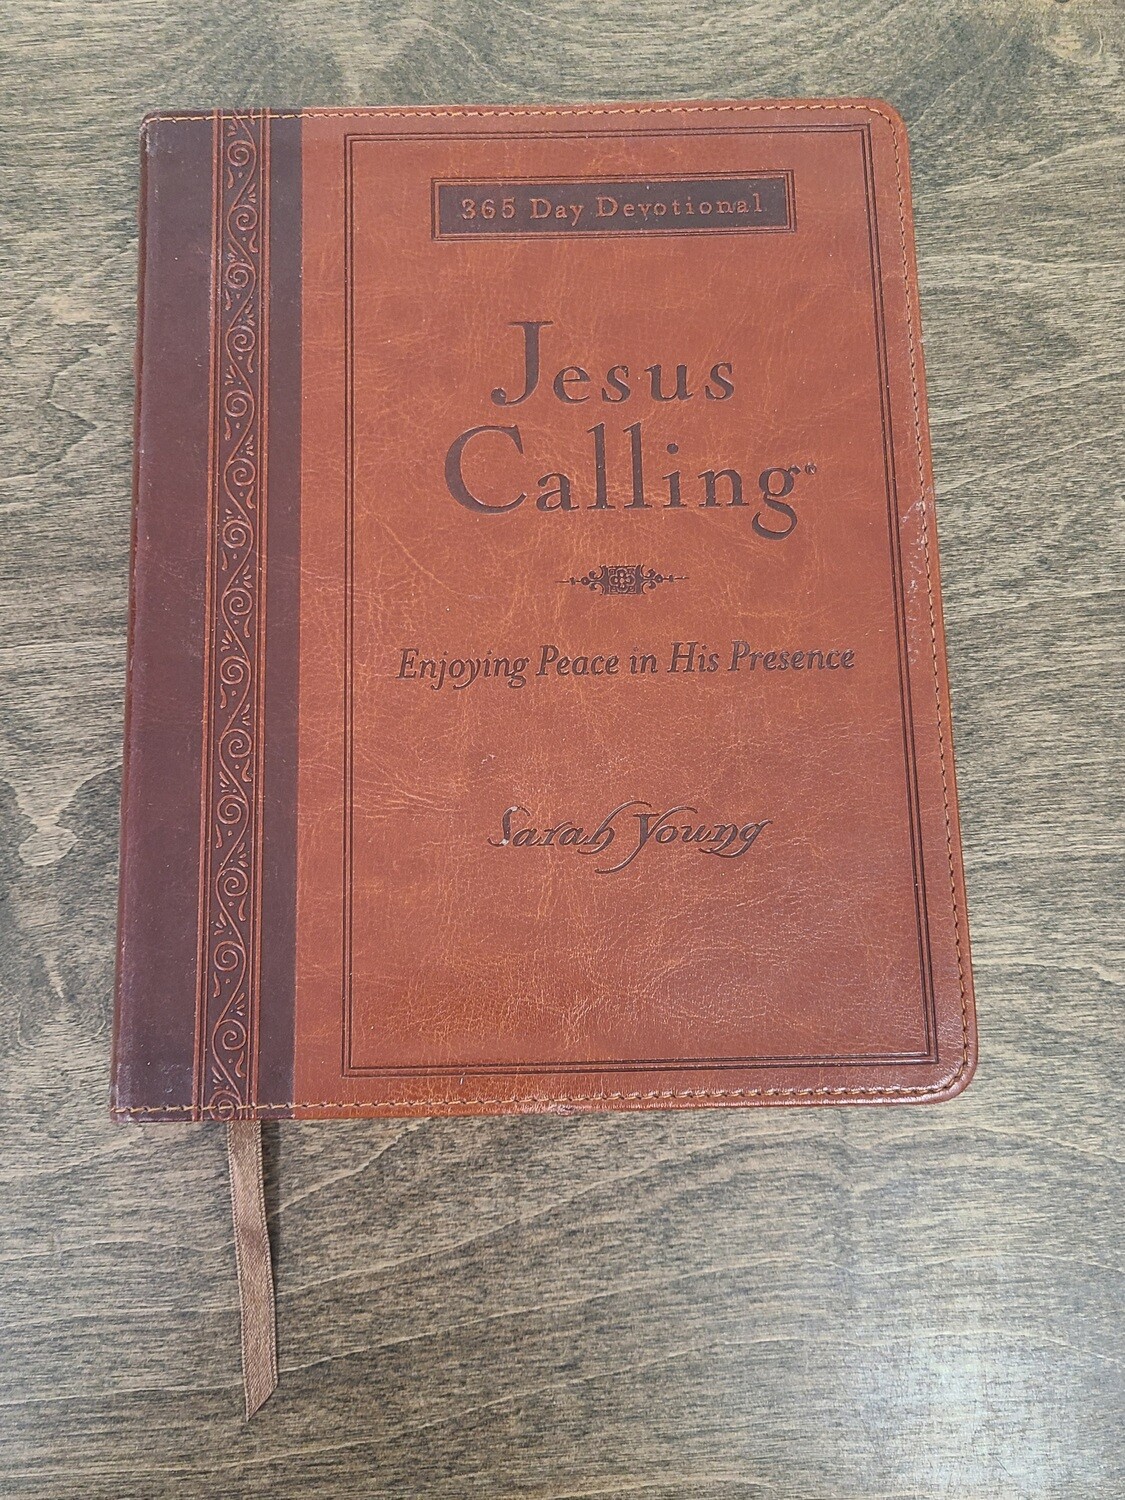 Jesus Calling by Sarah Young - Large Leatherbound Paperback